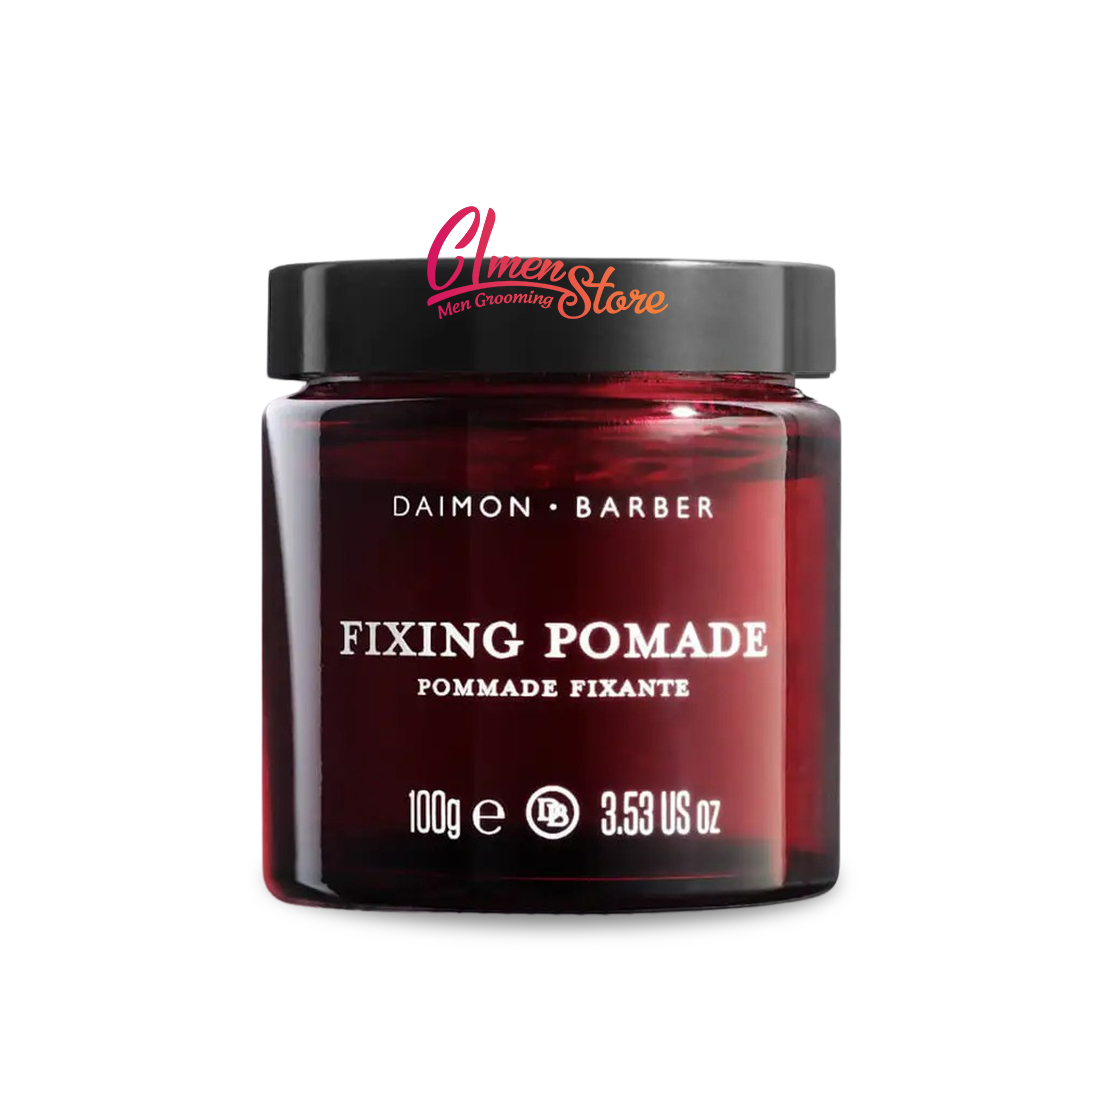 daimon barber fixing pomade